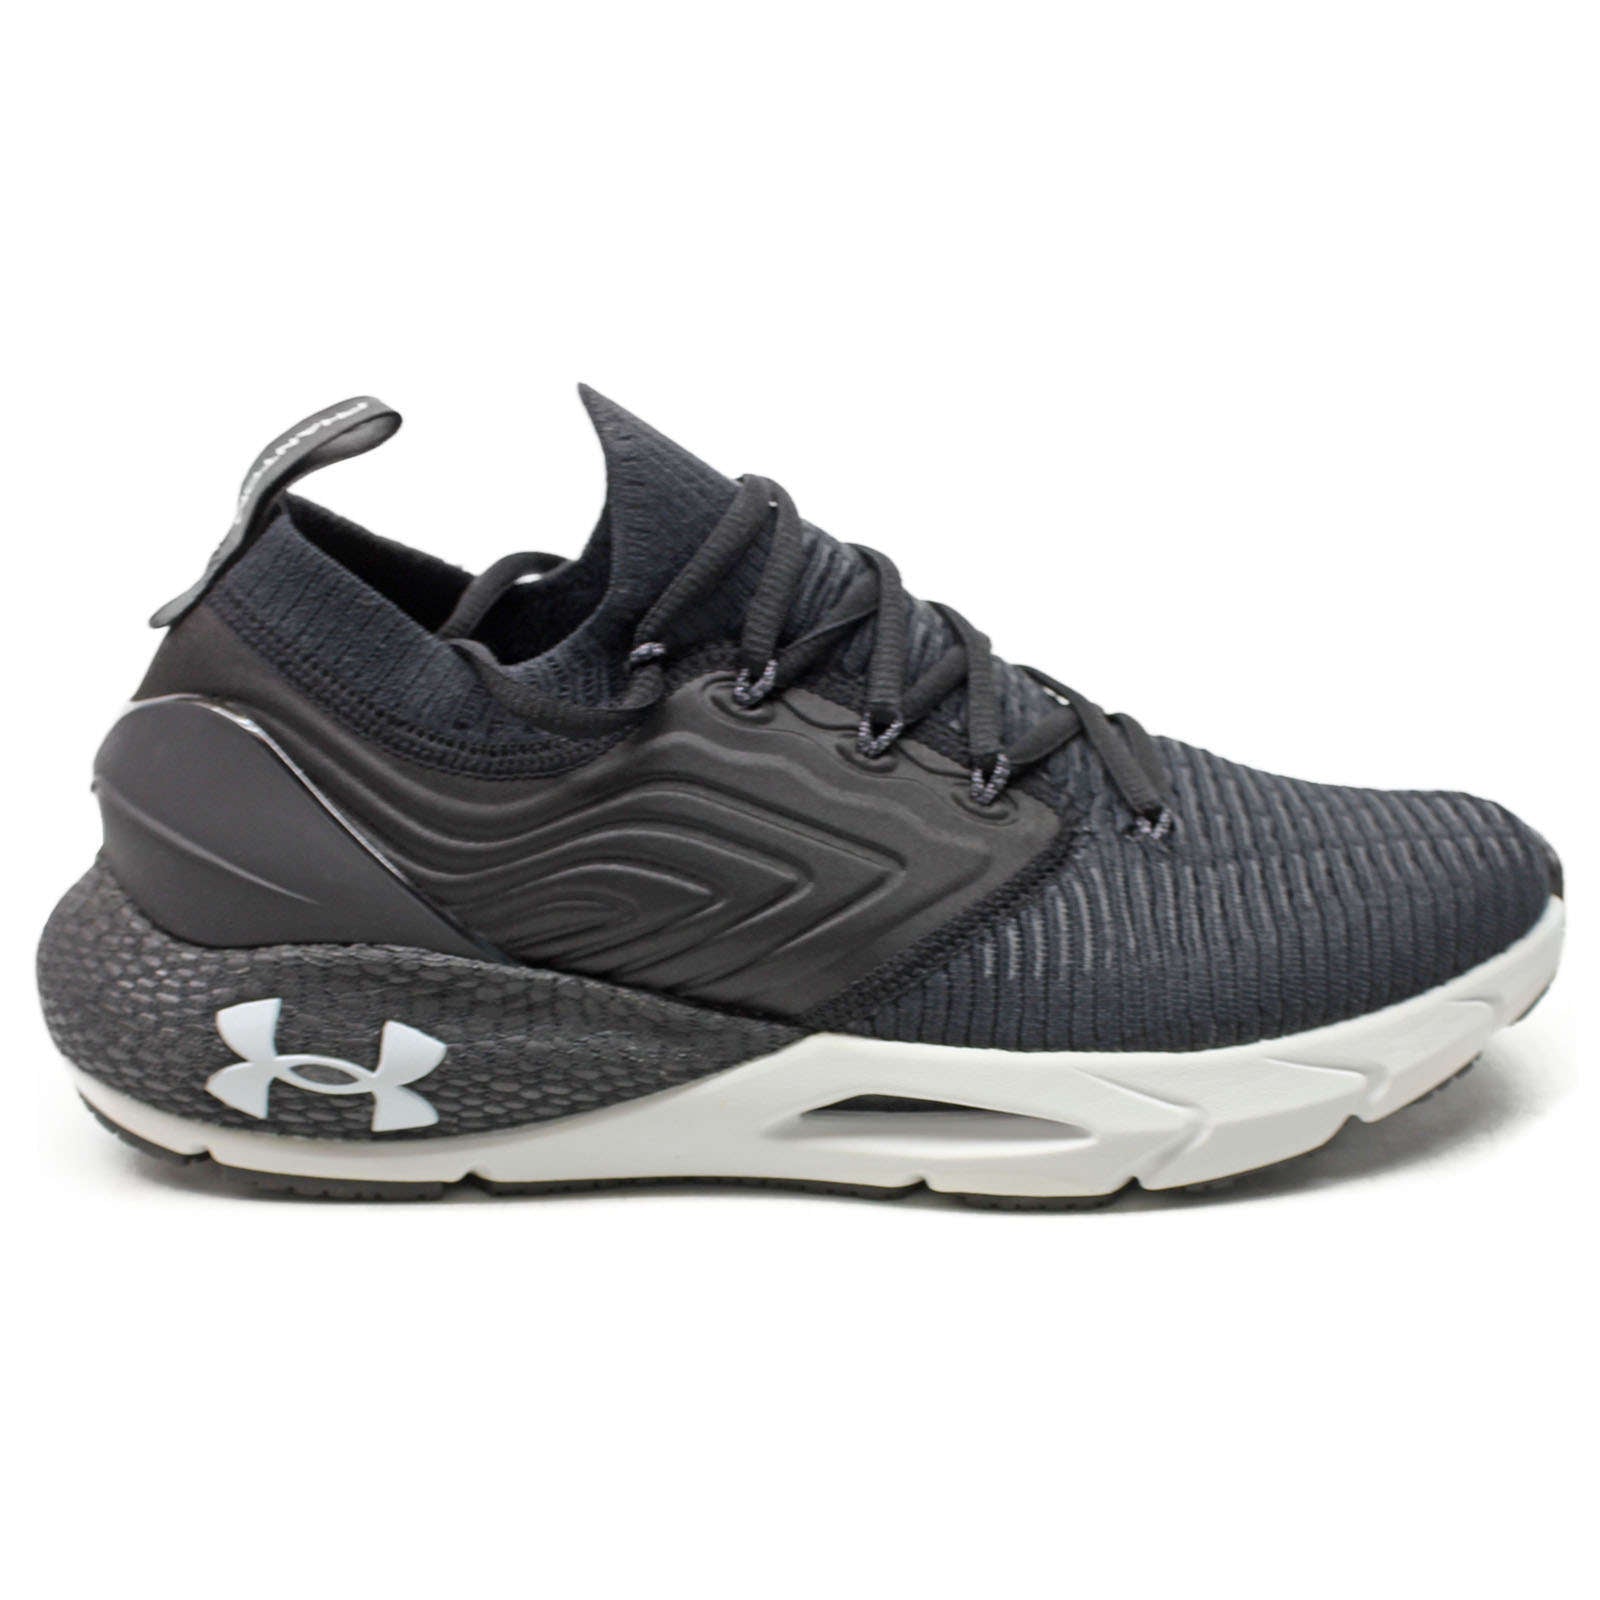 Under Armour HOVR Phantom 2 INKNT Synthetic Textile Men's Low-Top Trainers#color_black grey